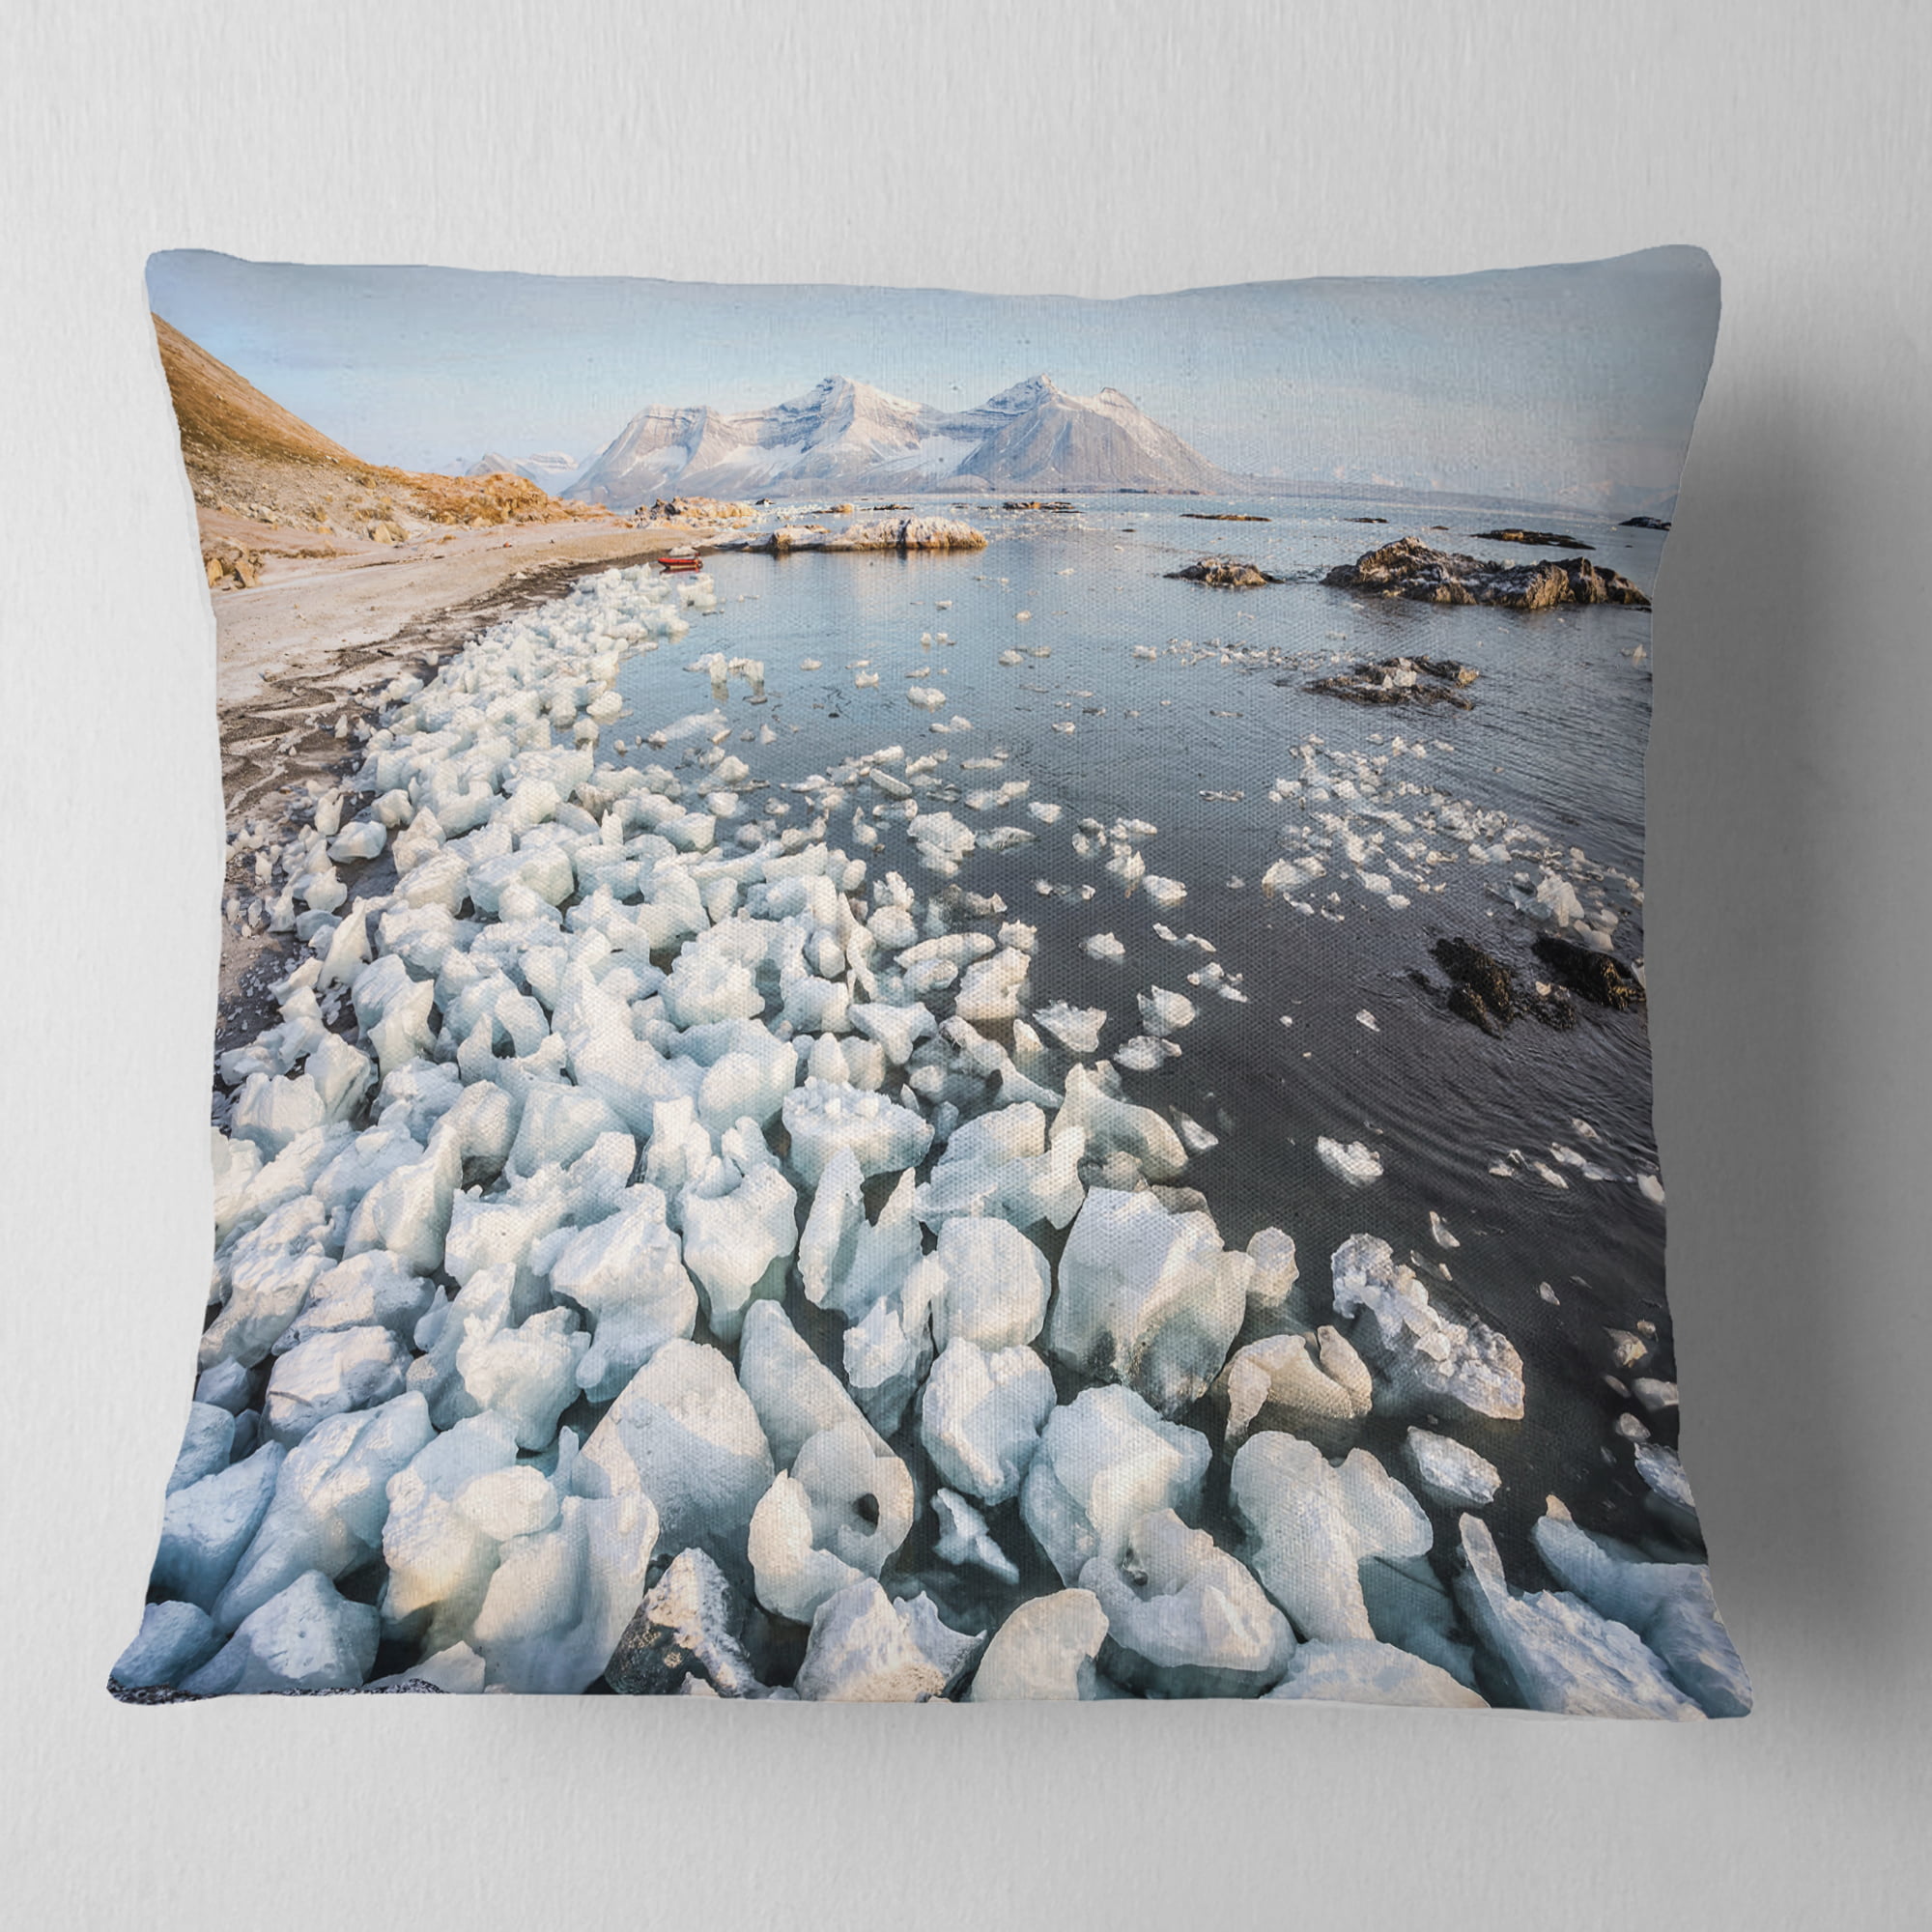 Sofa Throw Pillow 16 in in x 16 in Designart CU14668-16-16 Sunny Morning in Arctic Spitsbergen Landscape Printed Cushion Cover for Living Room